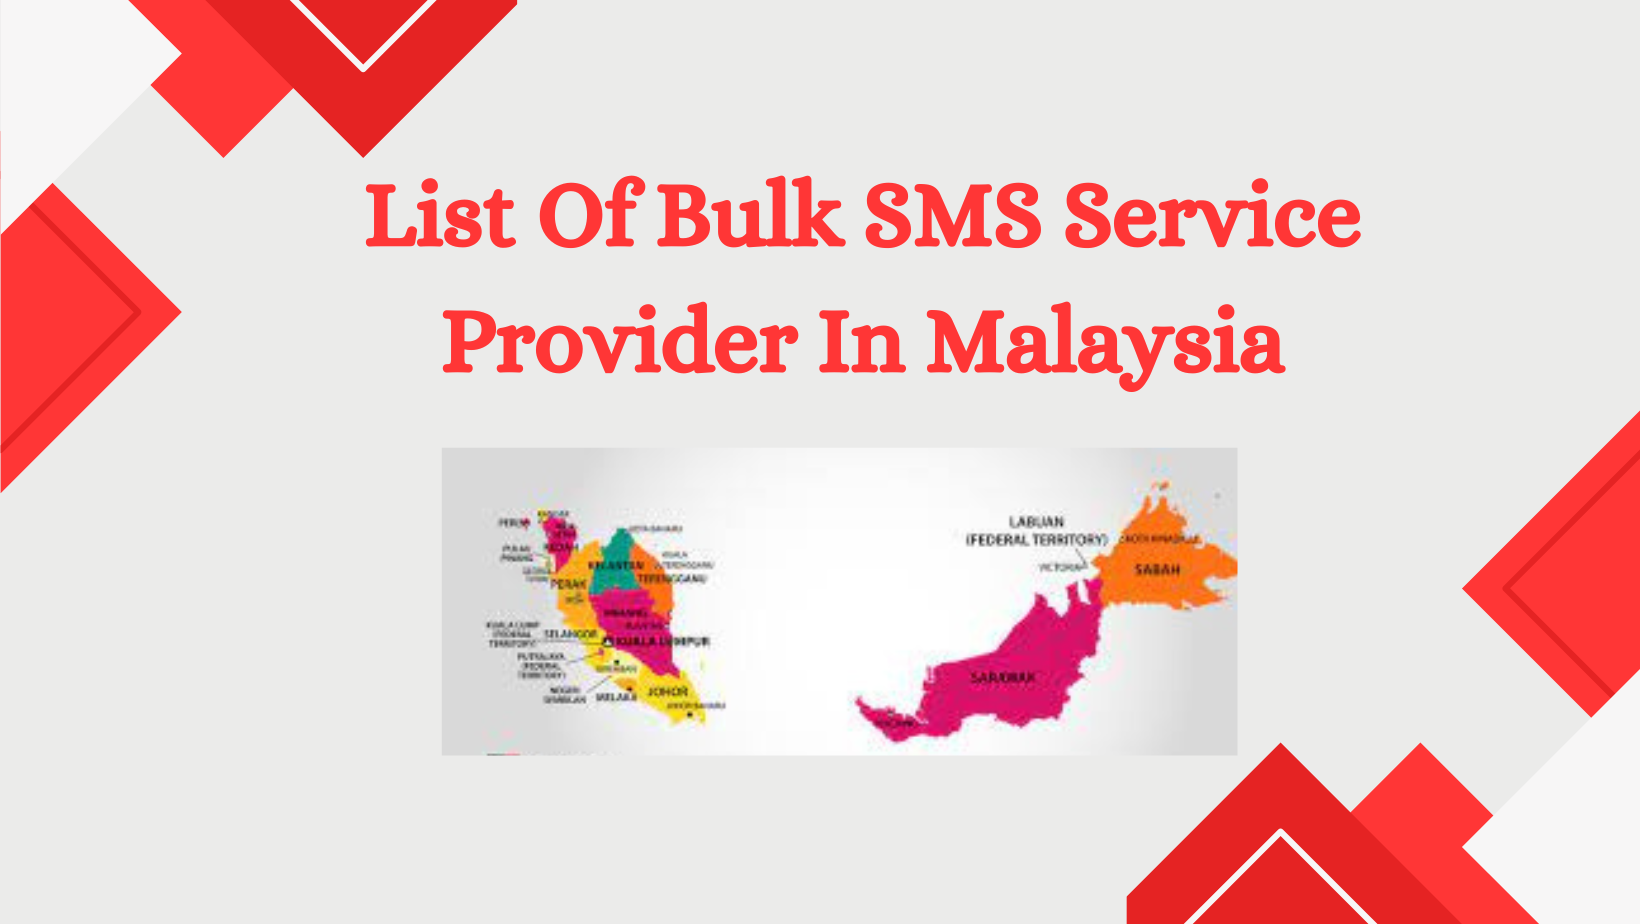 List Of Bulk SMS Service Provider In Malaysia